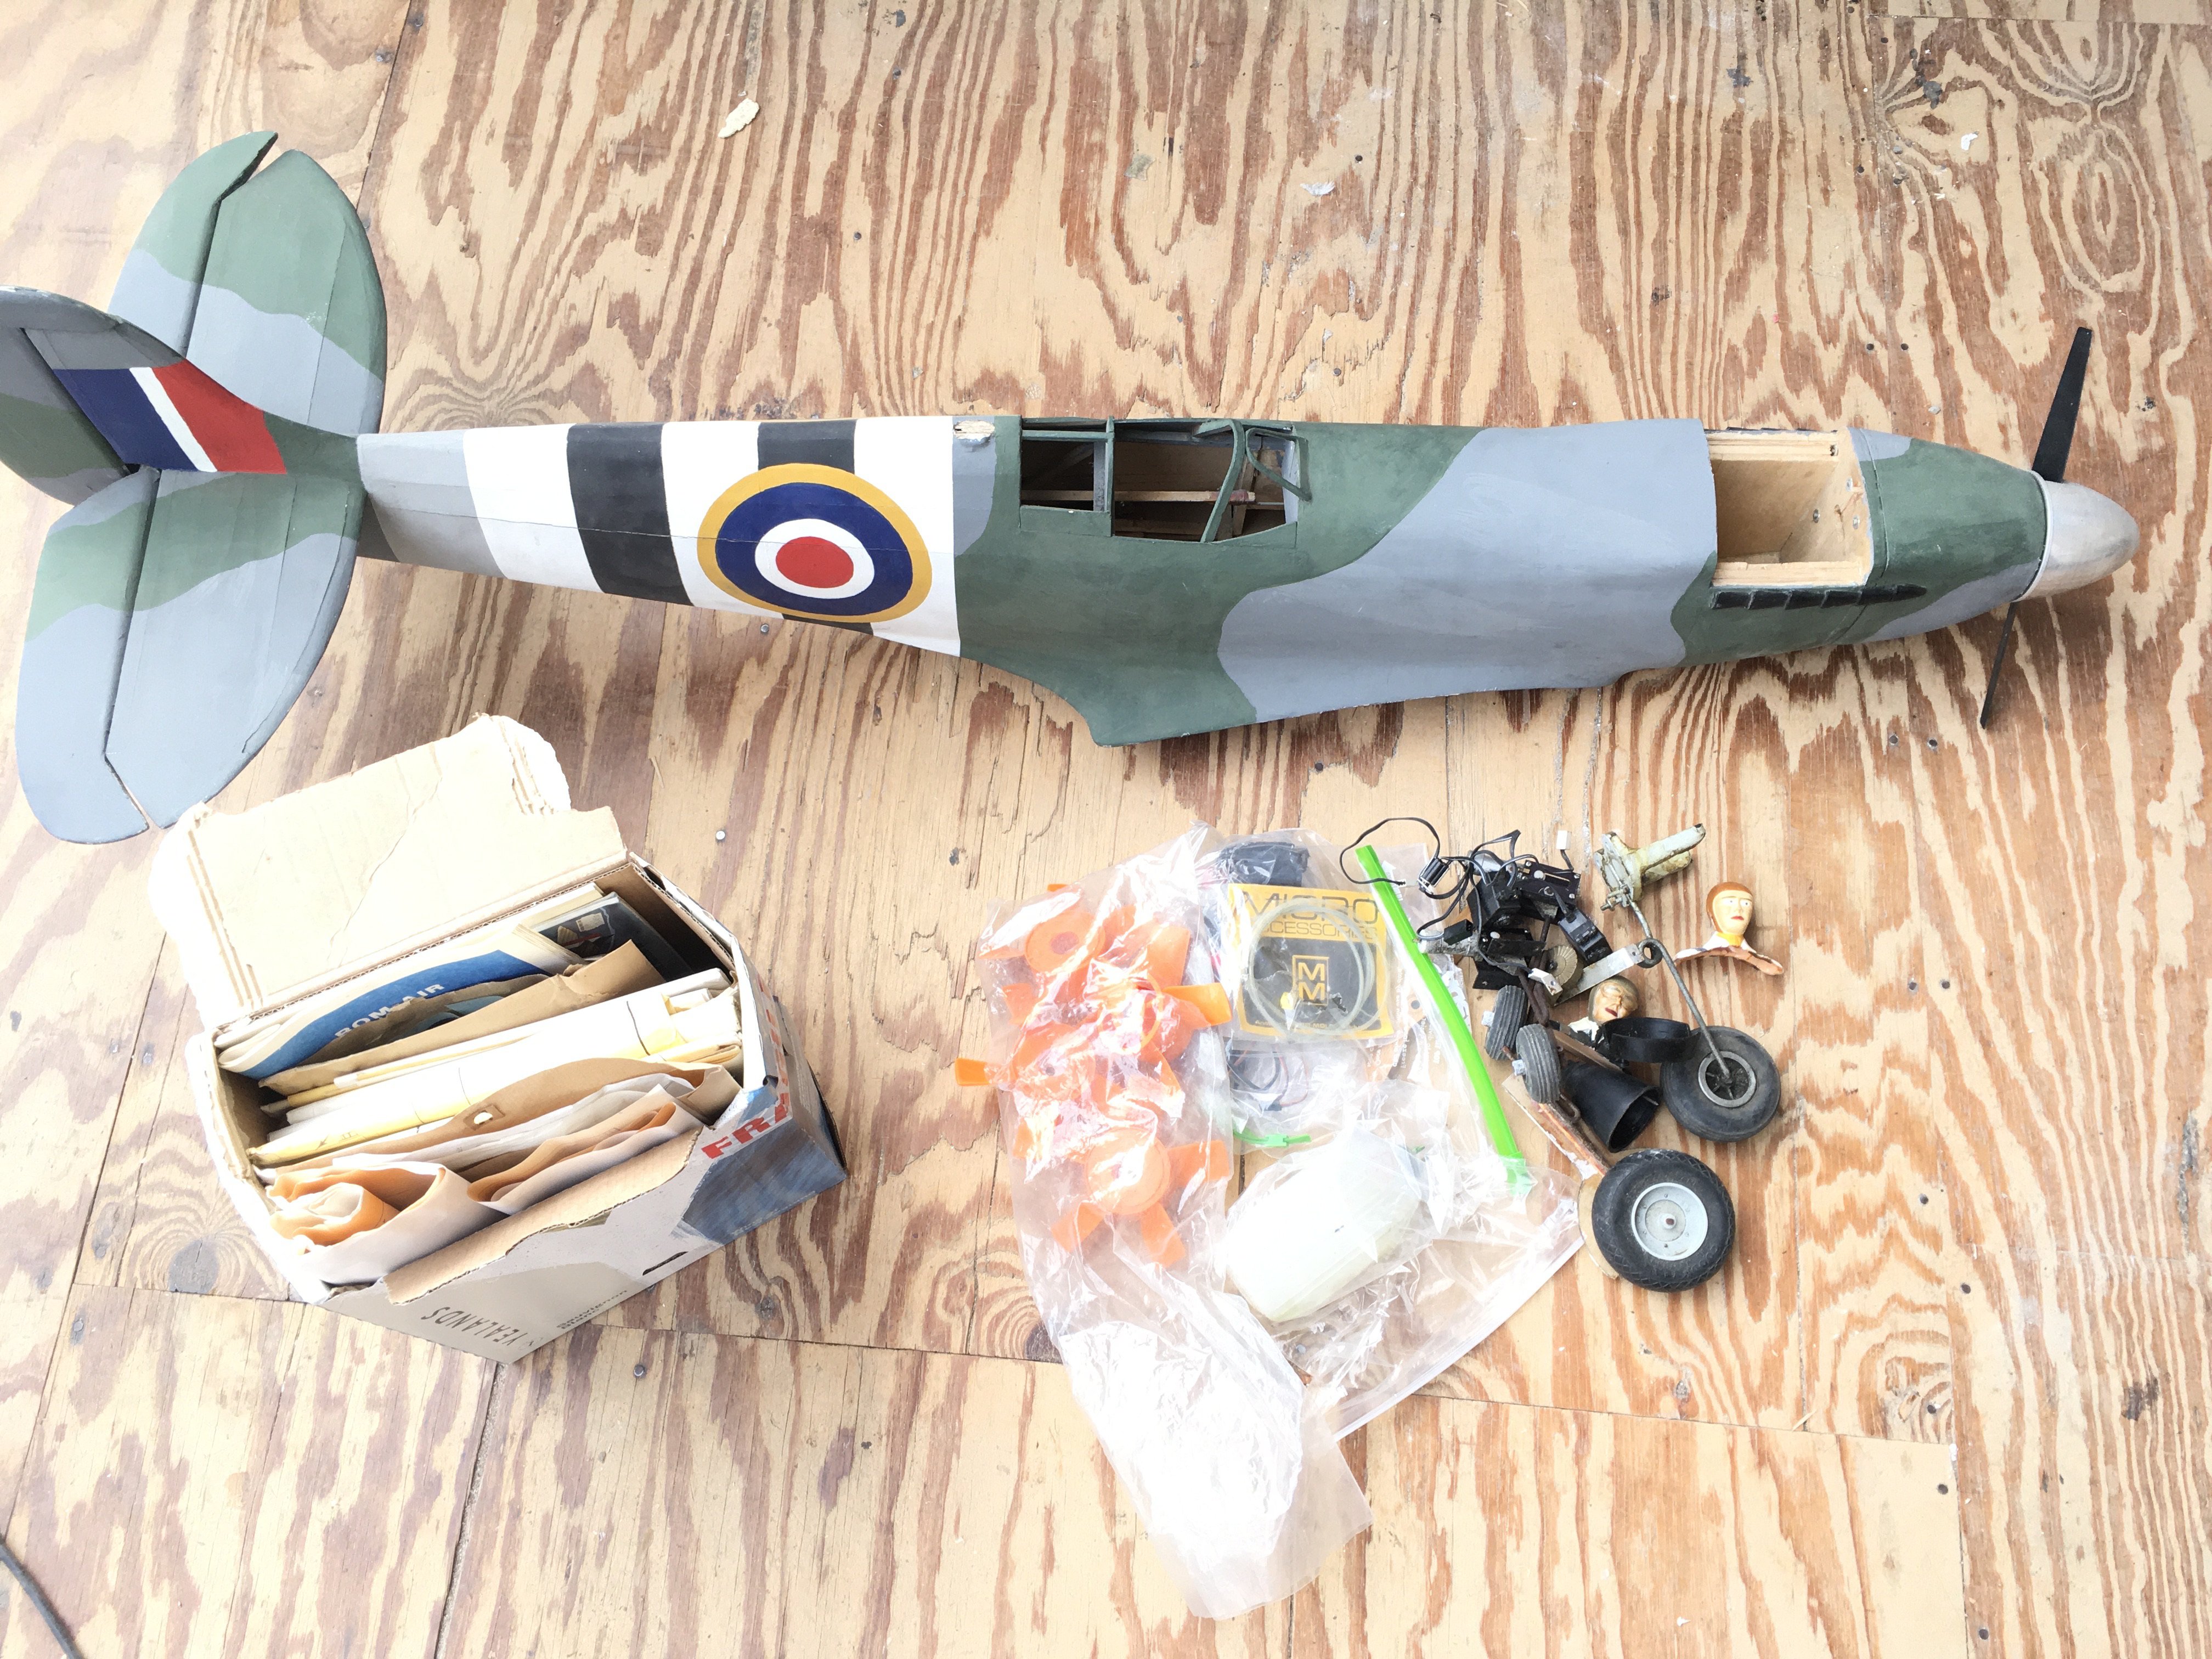 A incomplete Model spitfire with plans and Parts.